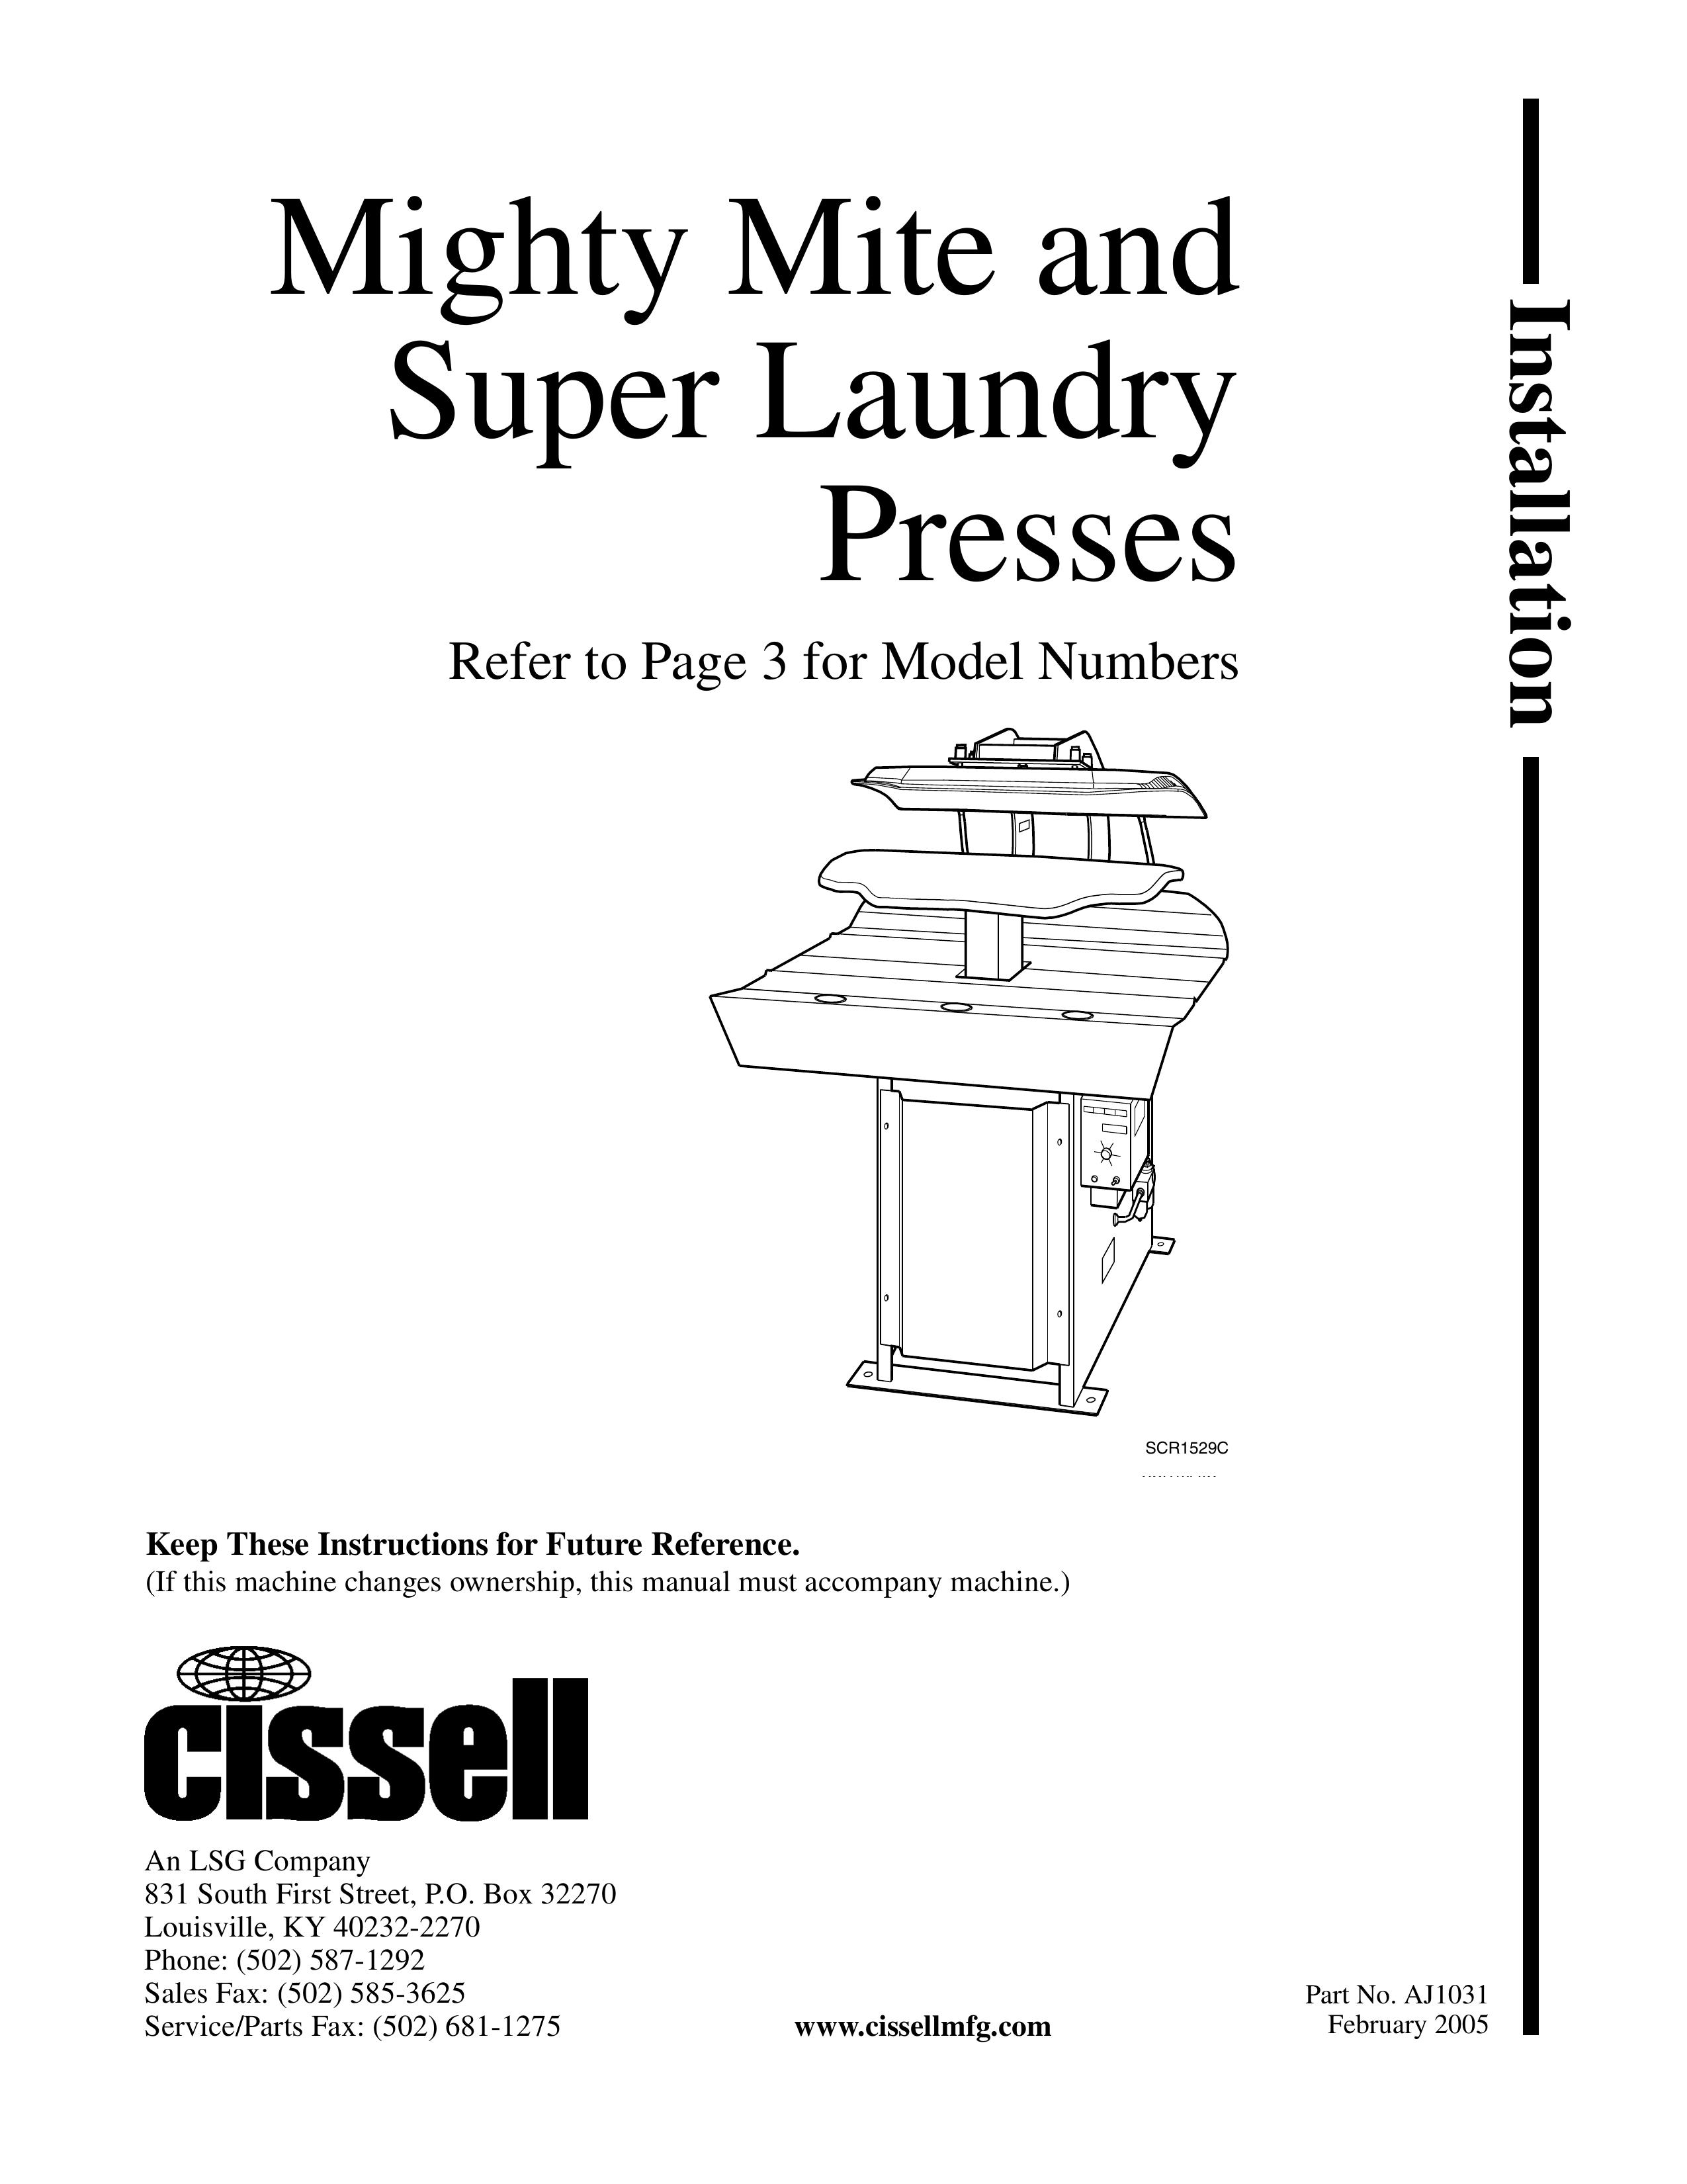 Cissell LDCC Clothes Dryer User Manual